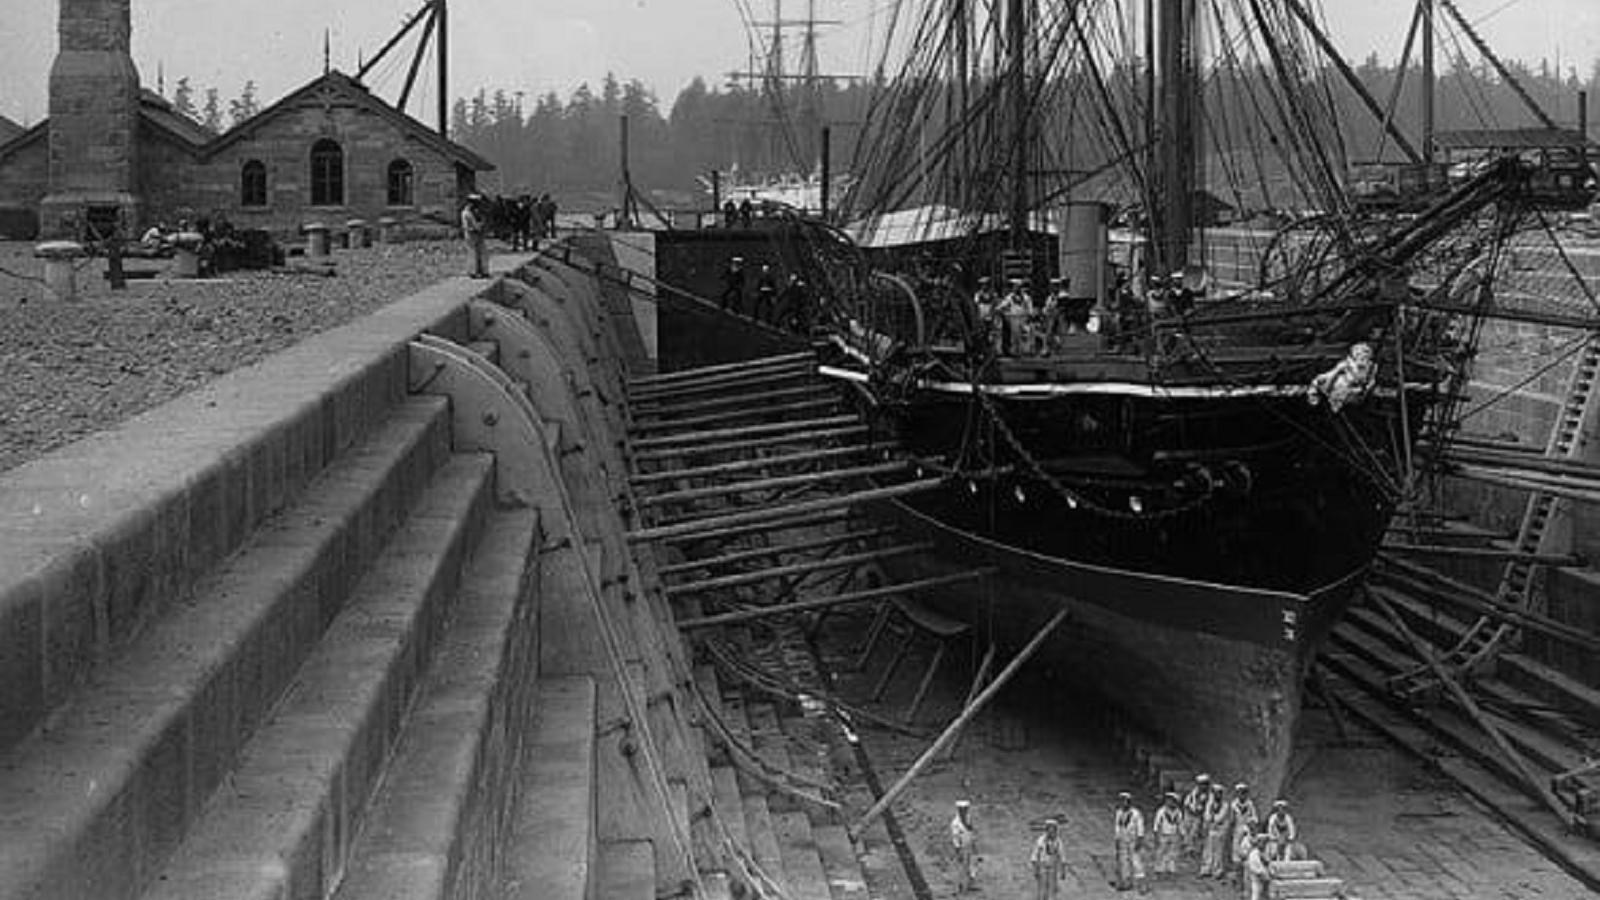 Black and white photograph of a large, three masted ship in a drydock